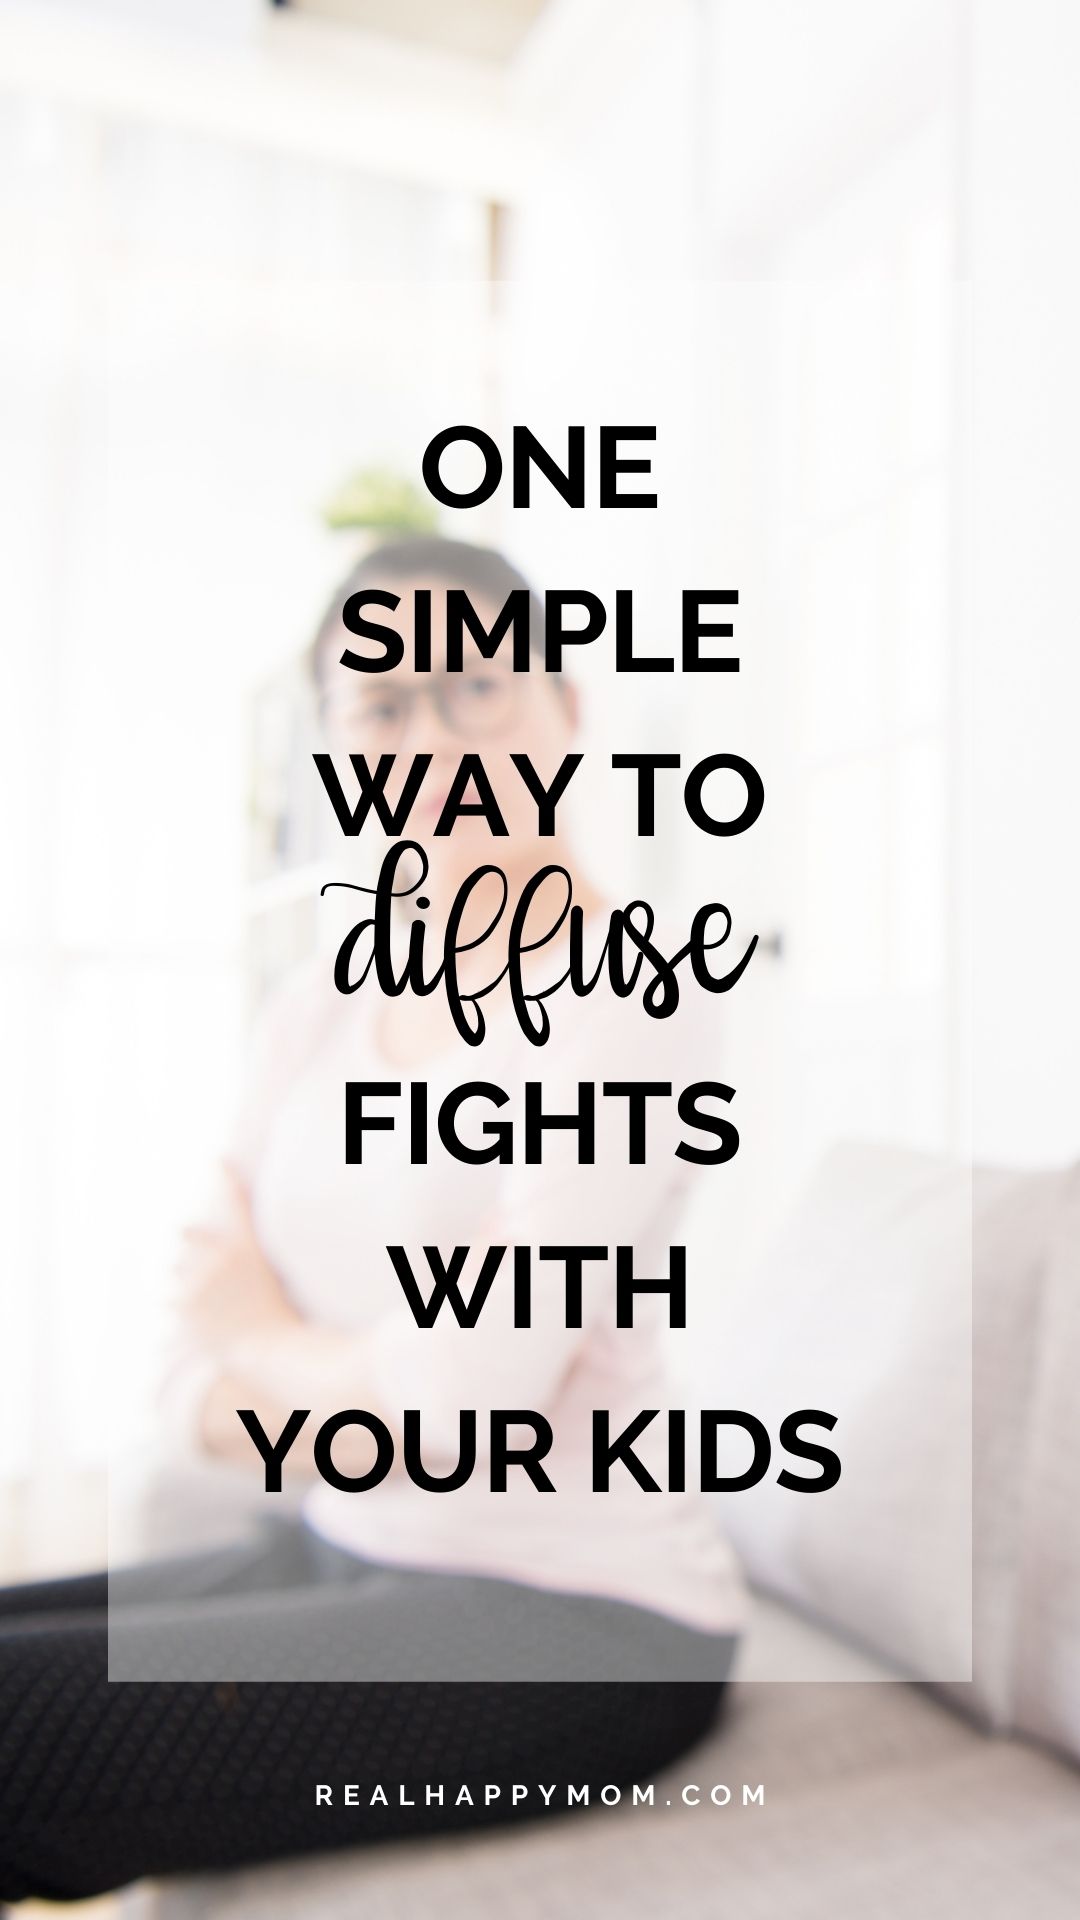 One Simple Way to Diffuse Fights With Your Kids